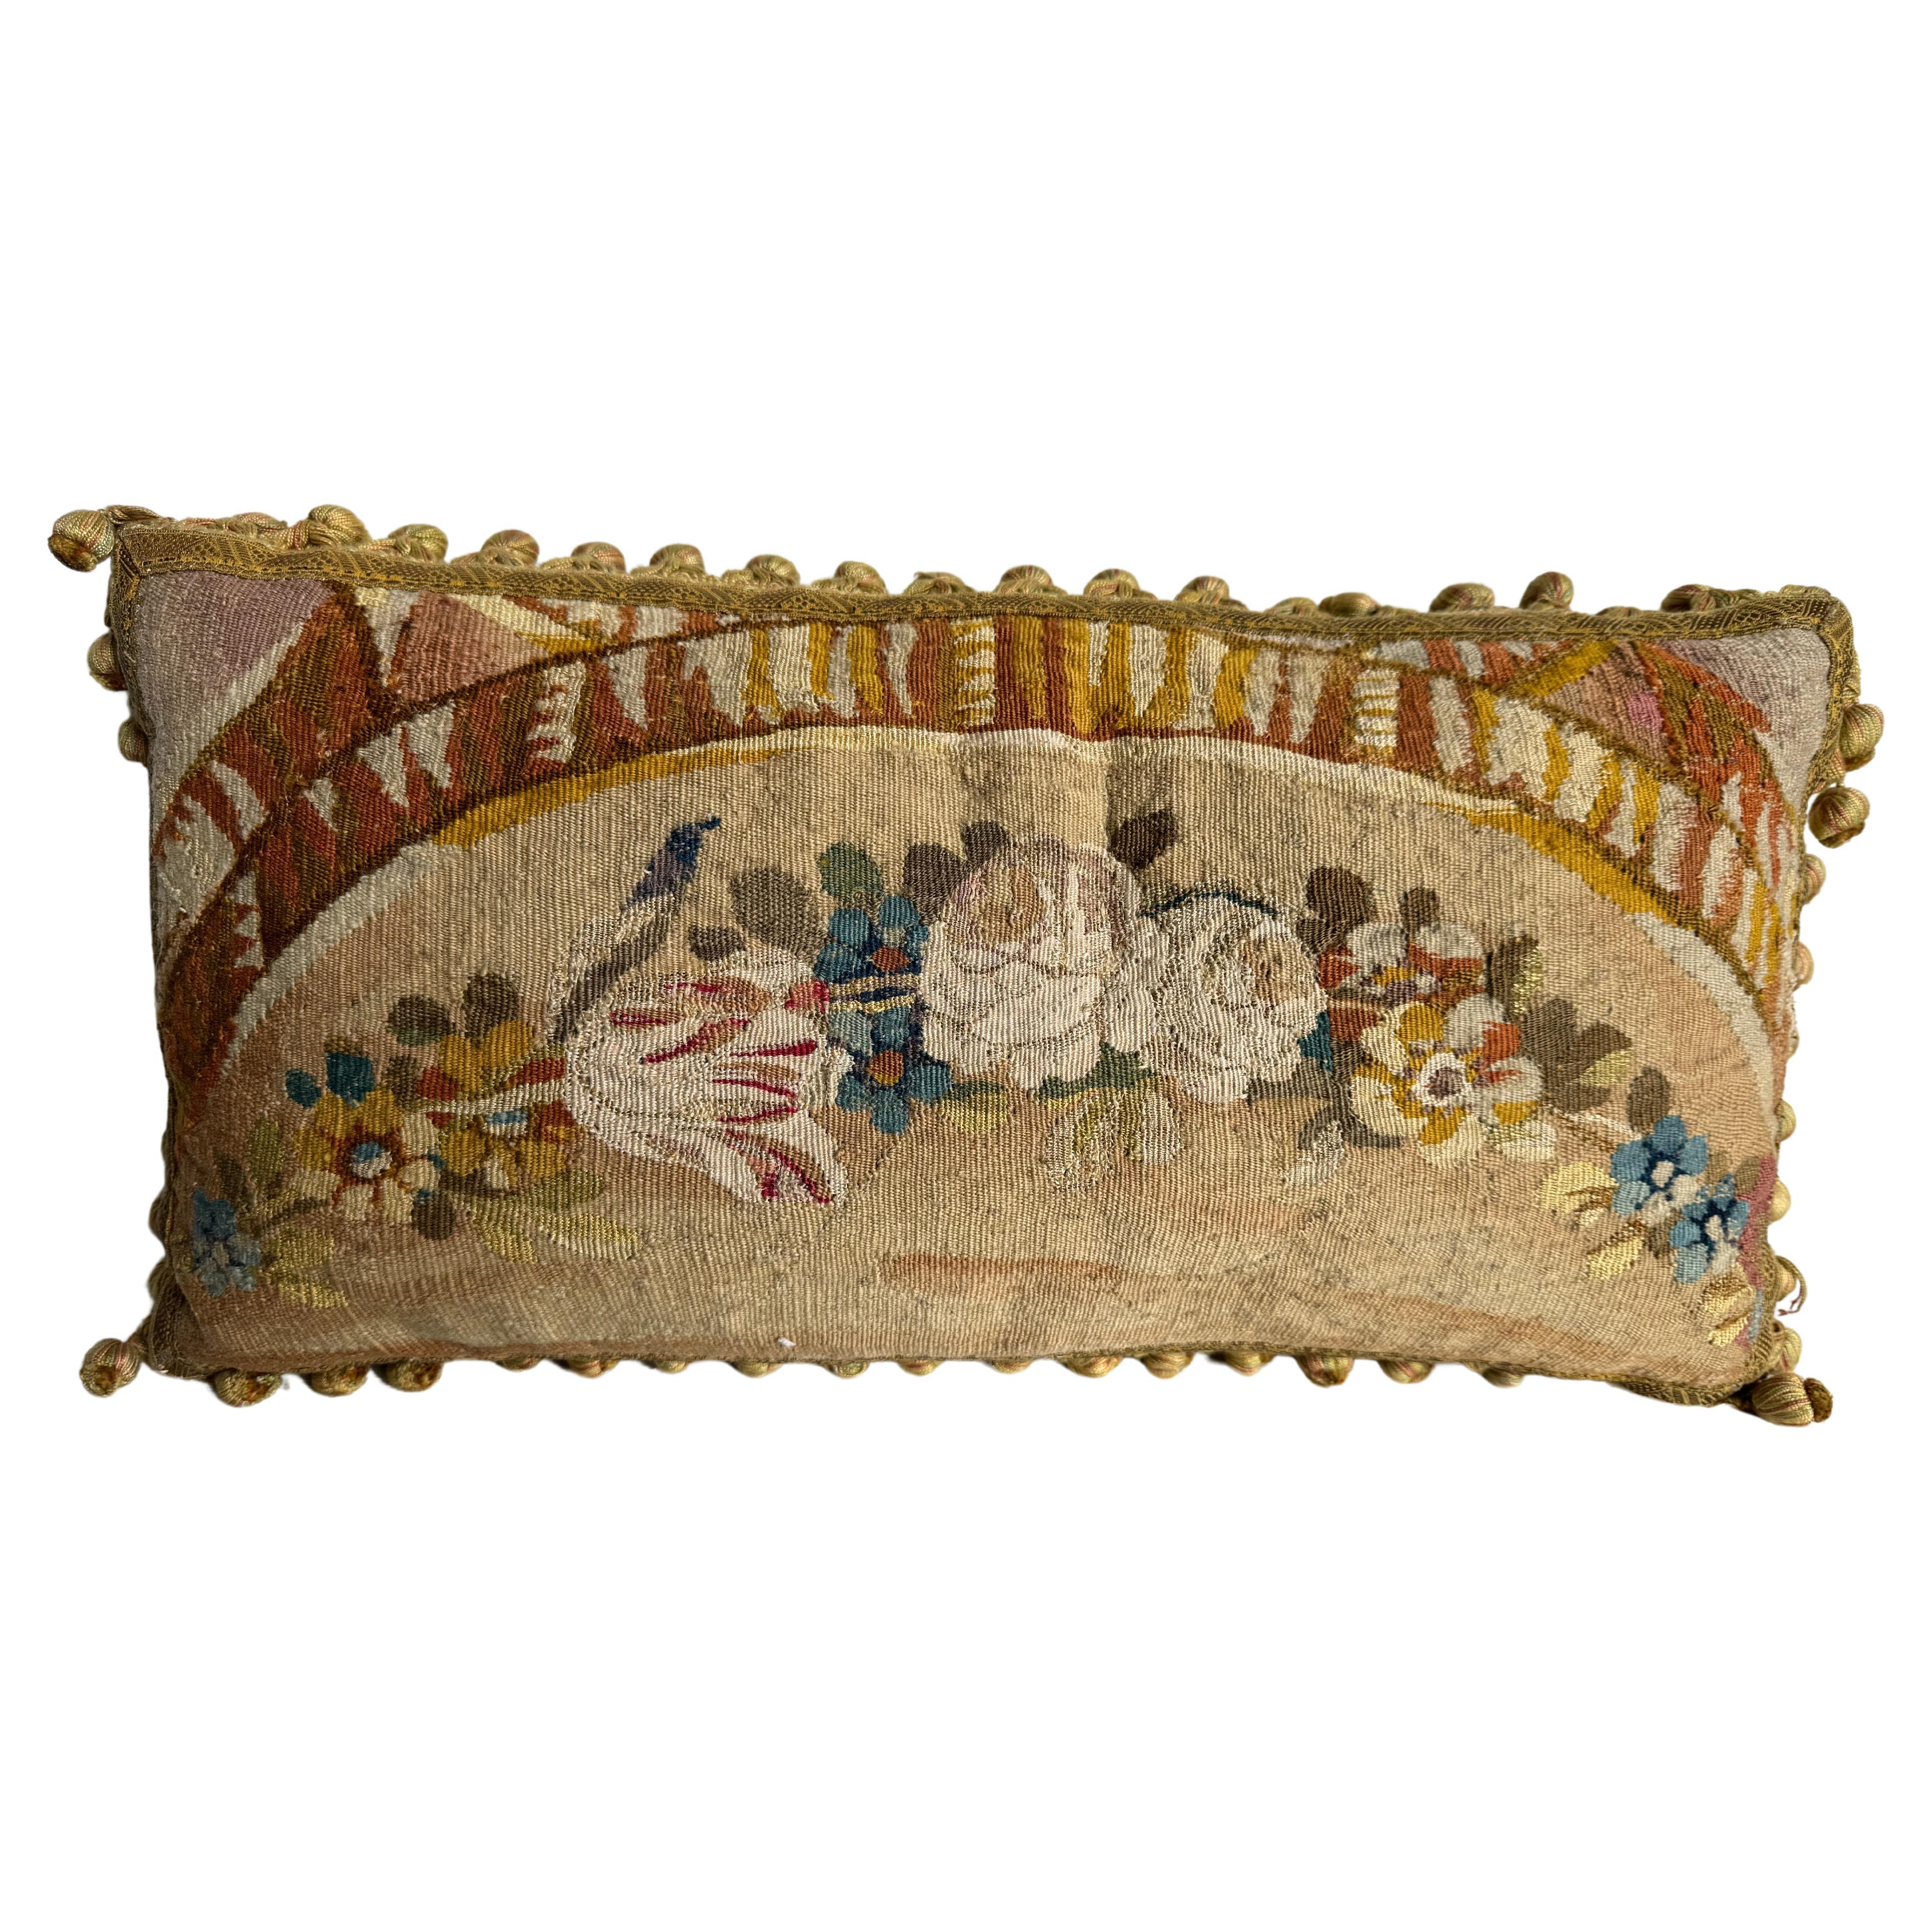 Aubusson French 1800 - 10.5" x 20"